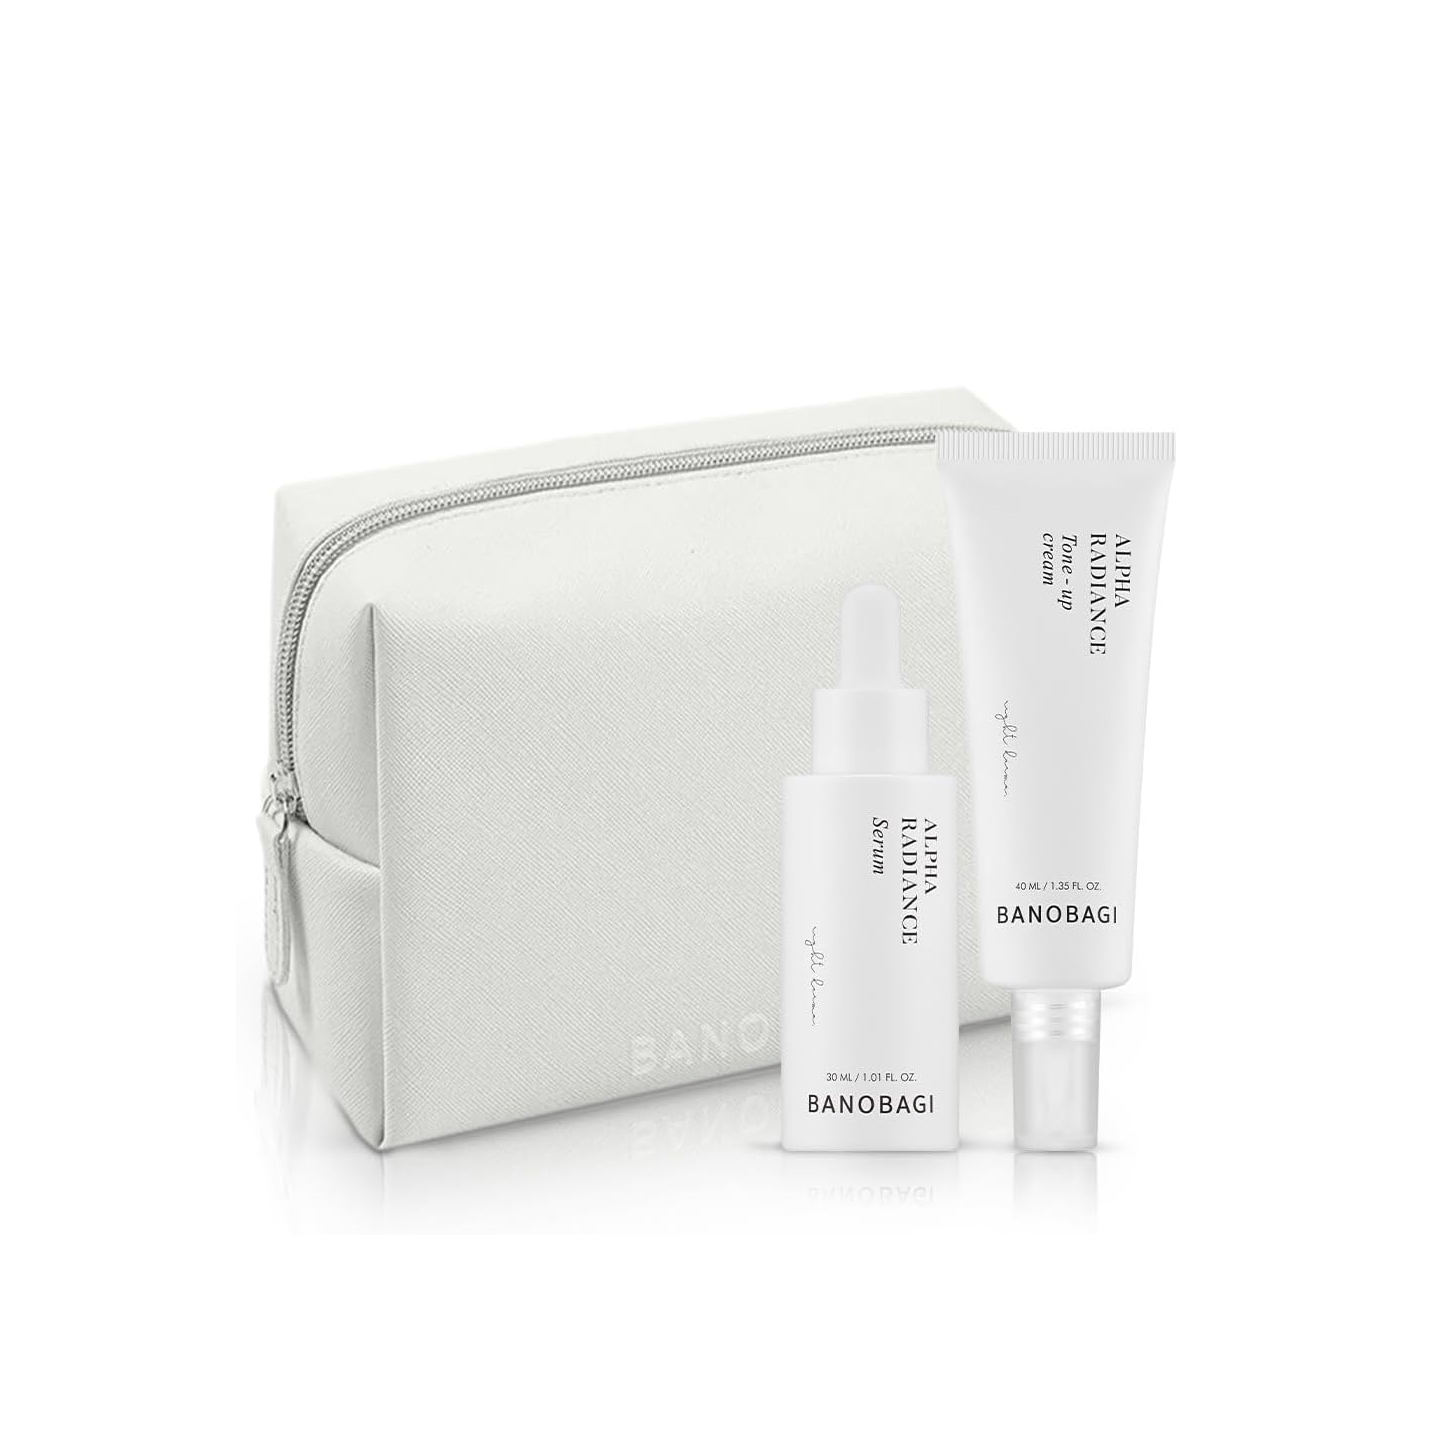 ALPHA RADIANCE GIFT PACK - Free beauty pouch